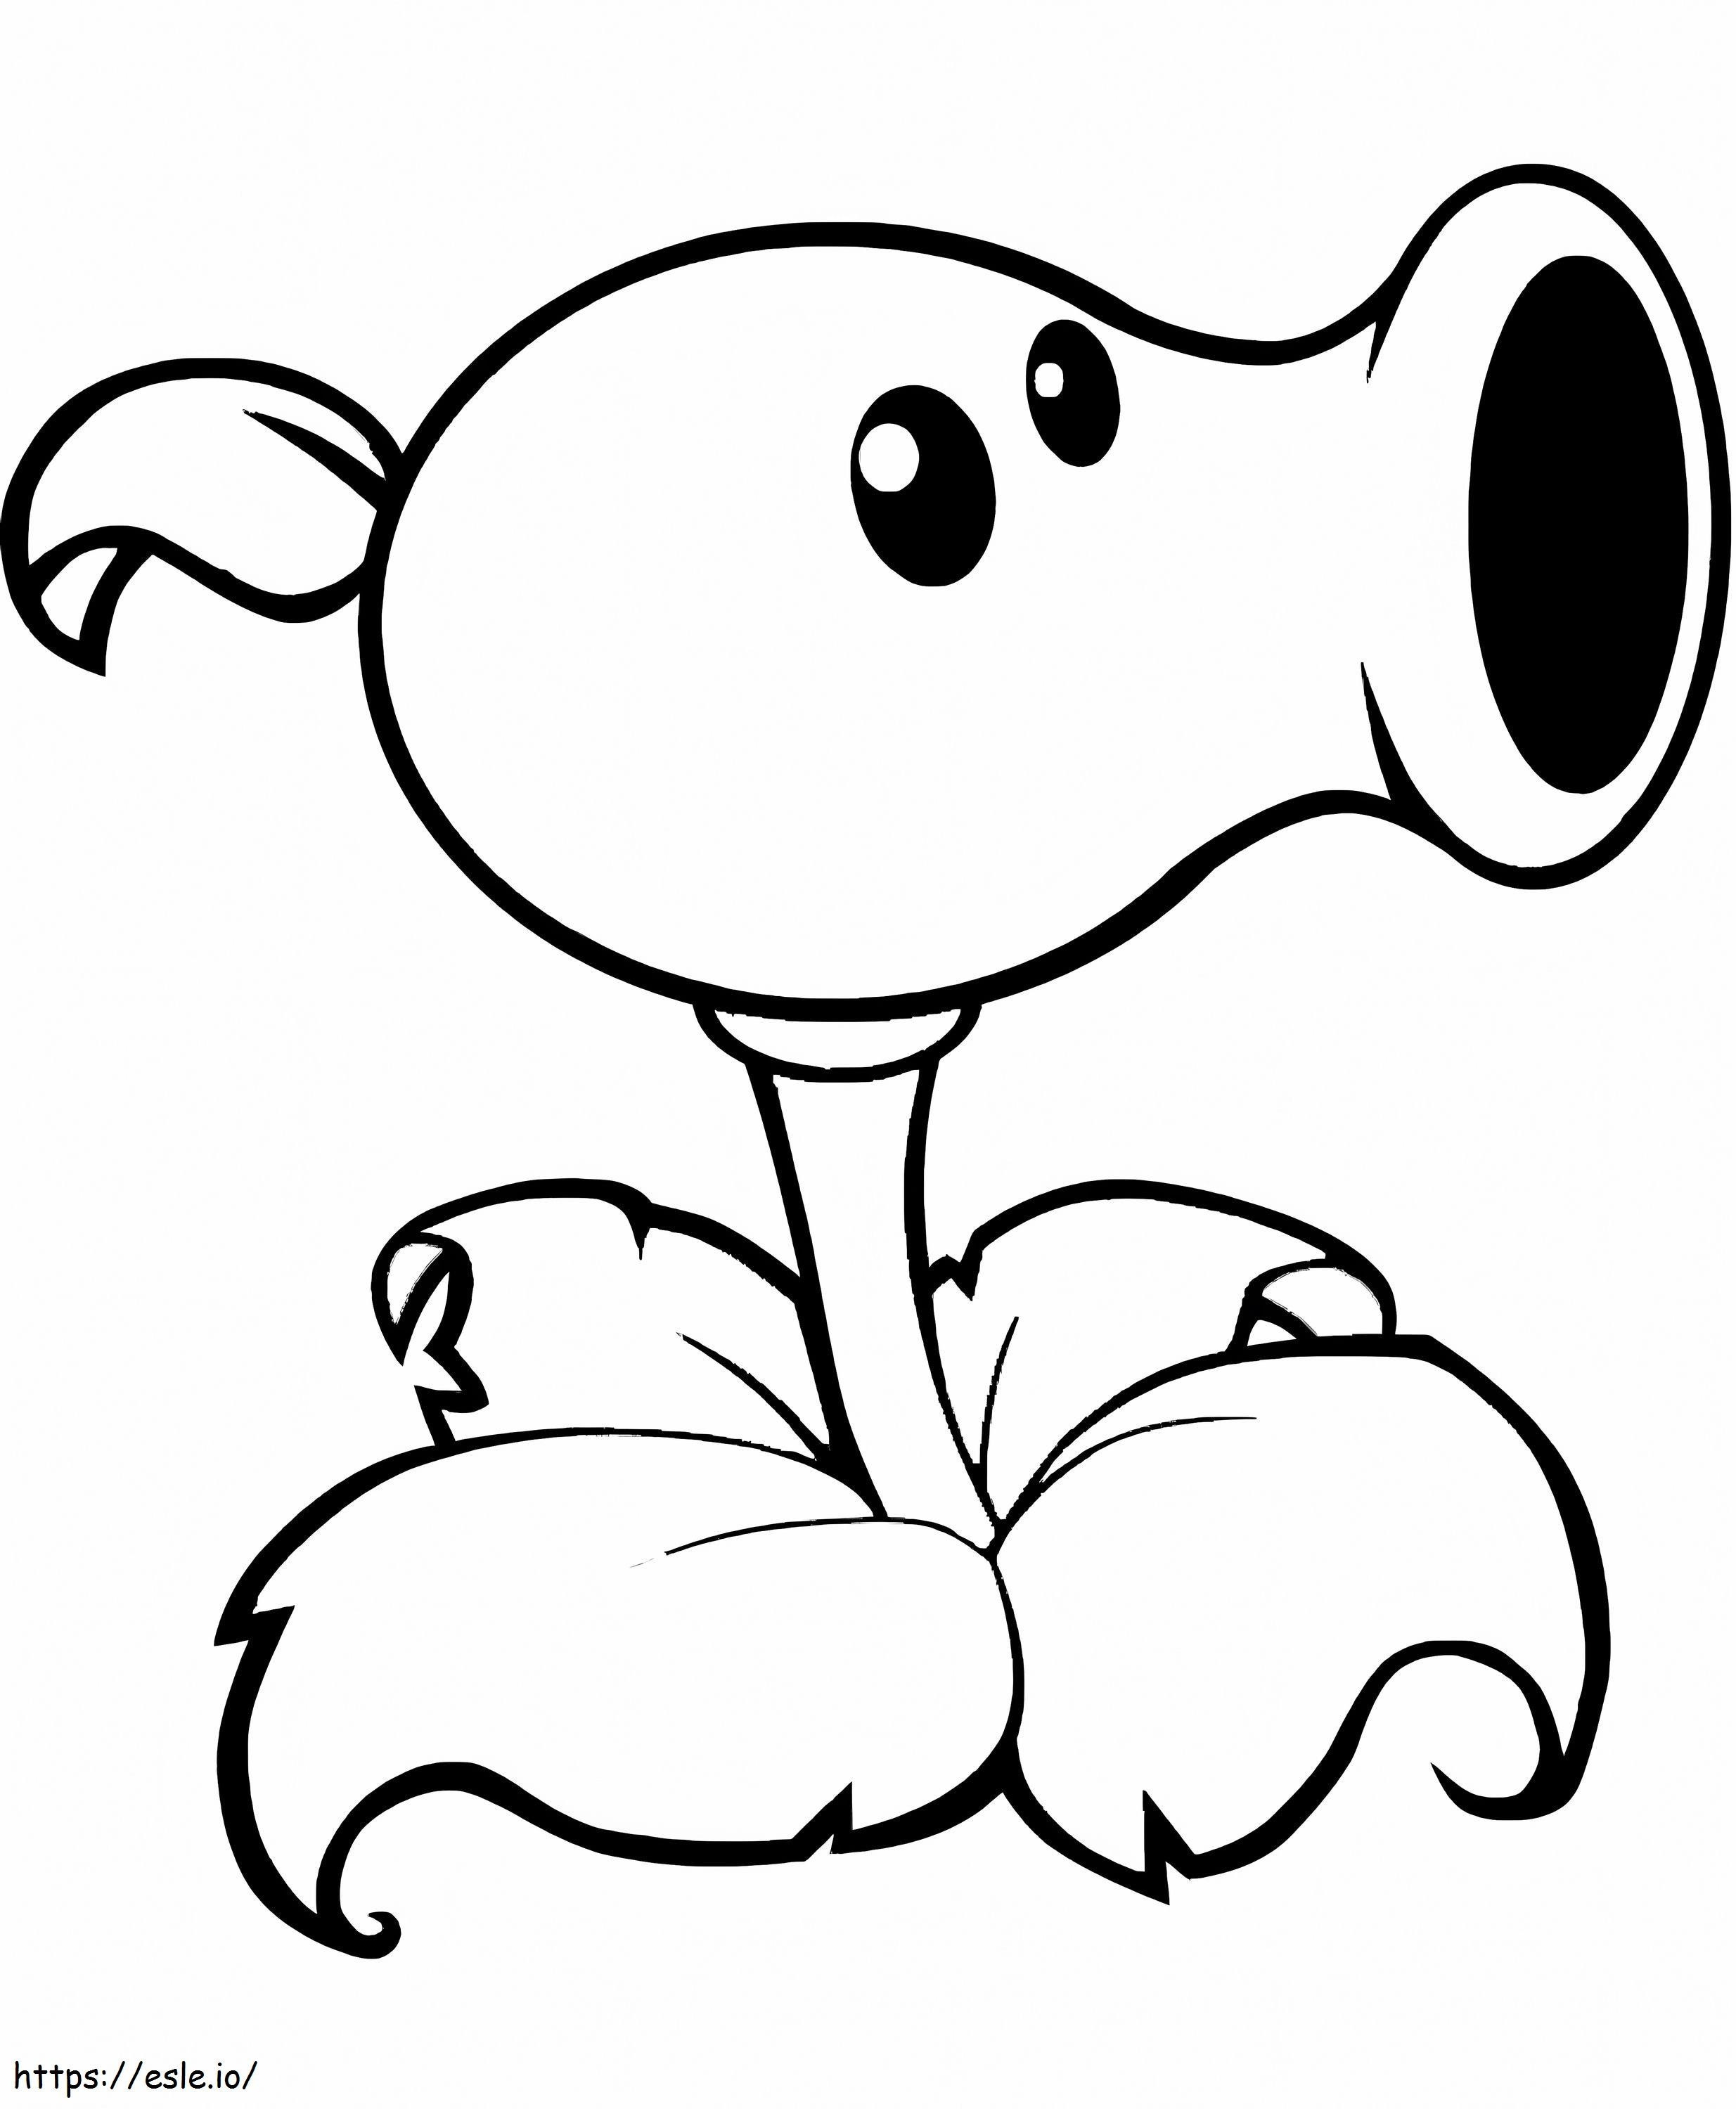 Peashooter A4 coloring page